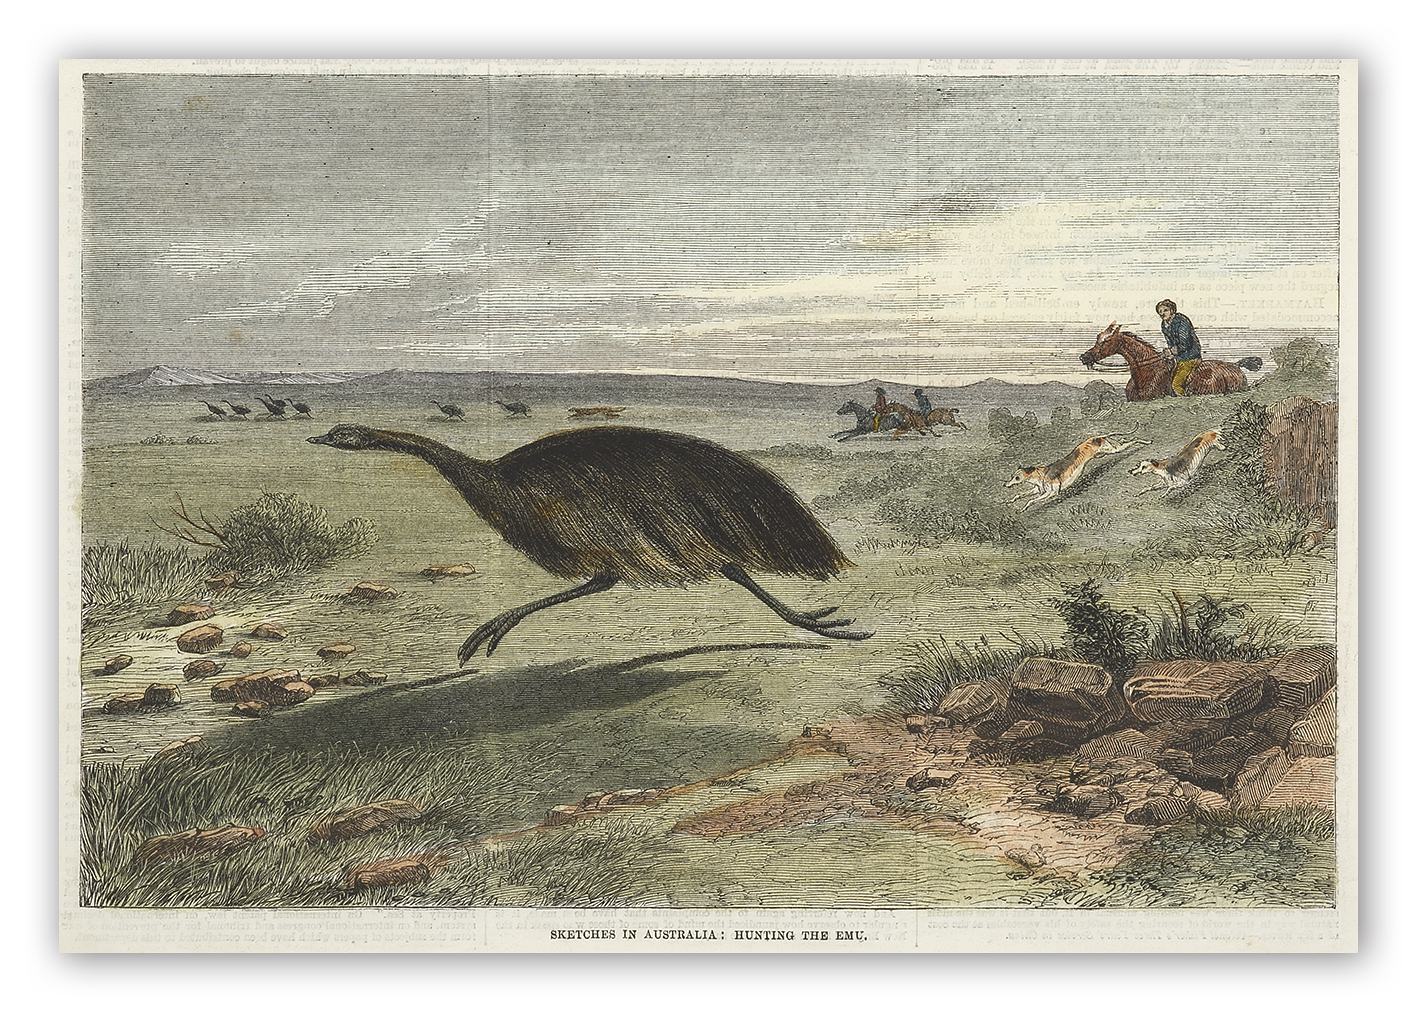 Sketches in Australia: Hunting the Emu. - Antique View from 1878